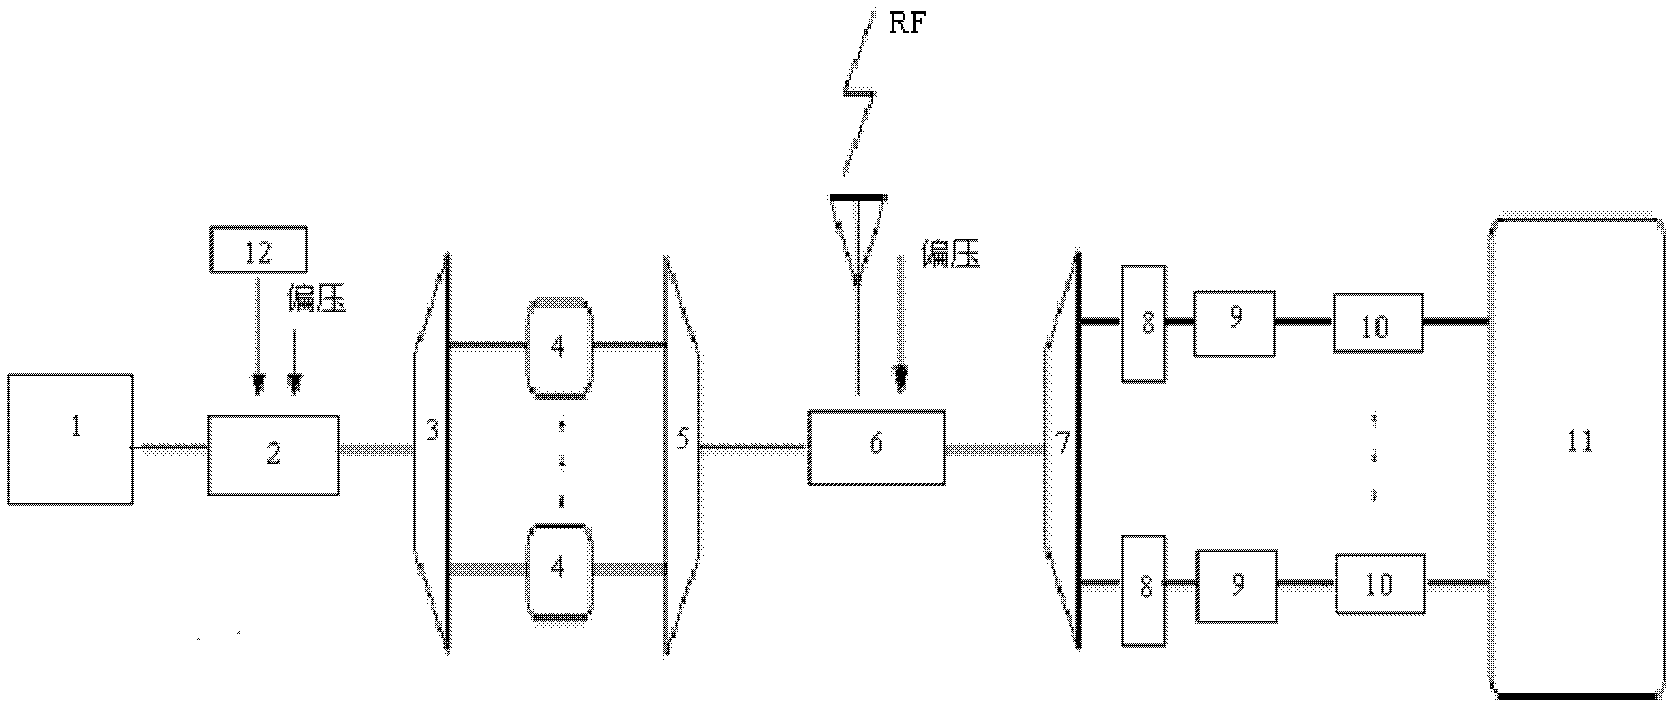 Photon-assisted multi-channel compression sampling (CS) system and method